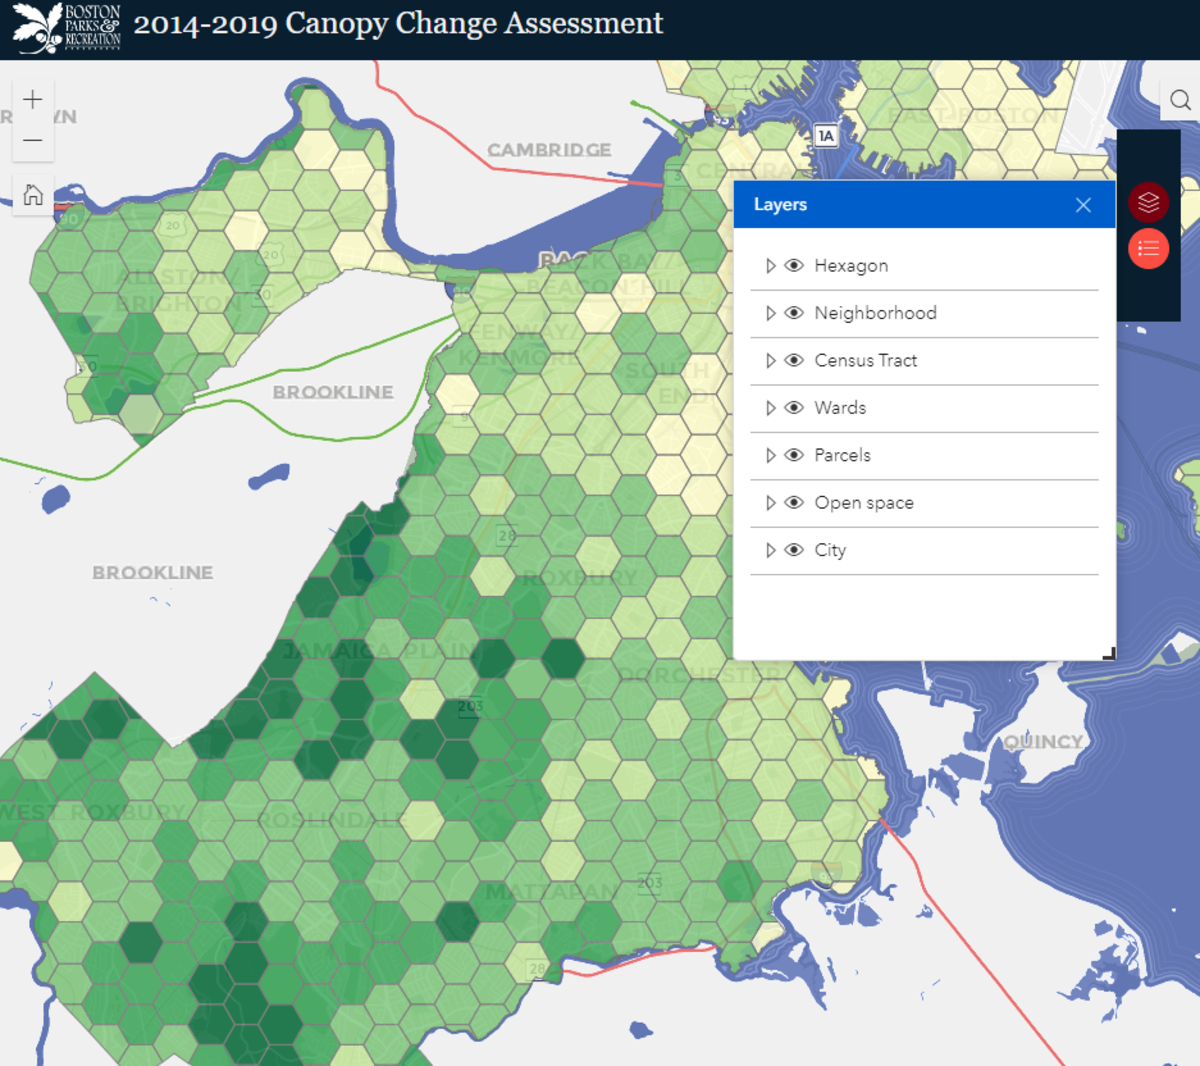 Canopy assessment map